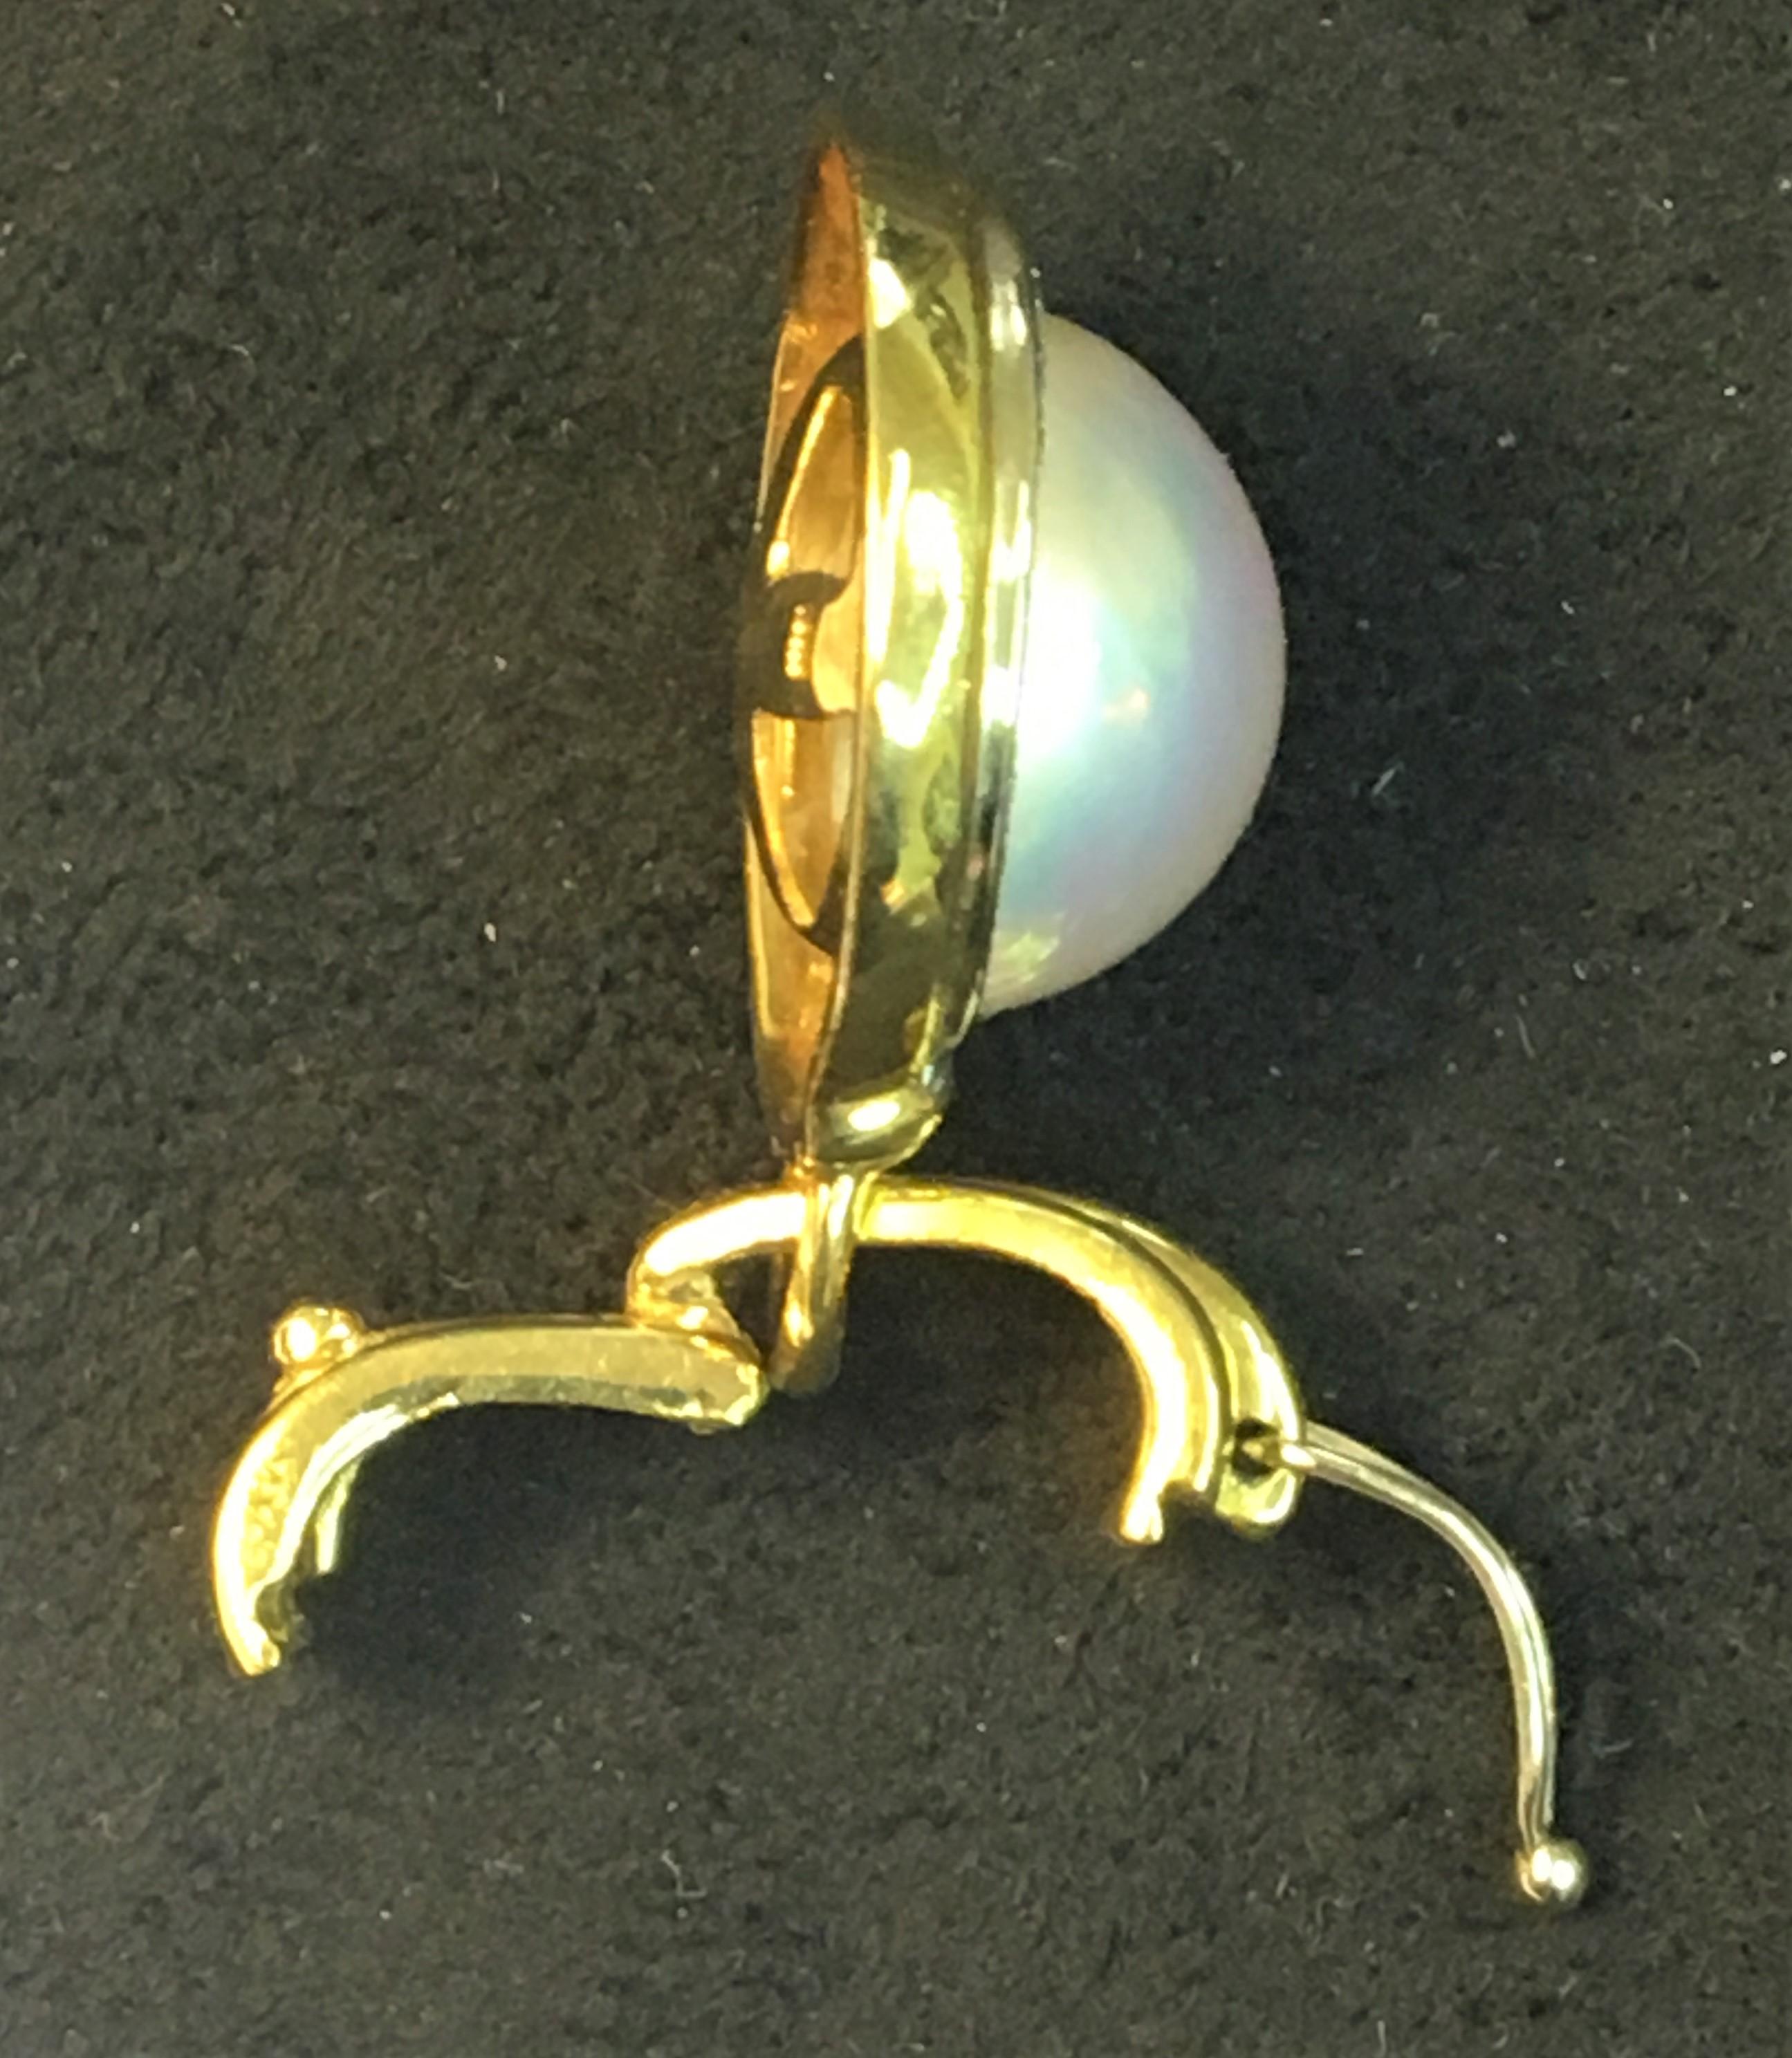 This beautiful piece can be worn every day or dressed up for an event!  It's the perfect classic gift!
Spark Creations, Inc.  2000
18 karat yellow gold round pendant with decorative hinged bail with safety
White mabe pearl, approximately 14mm